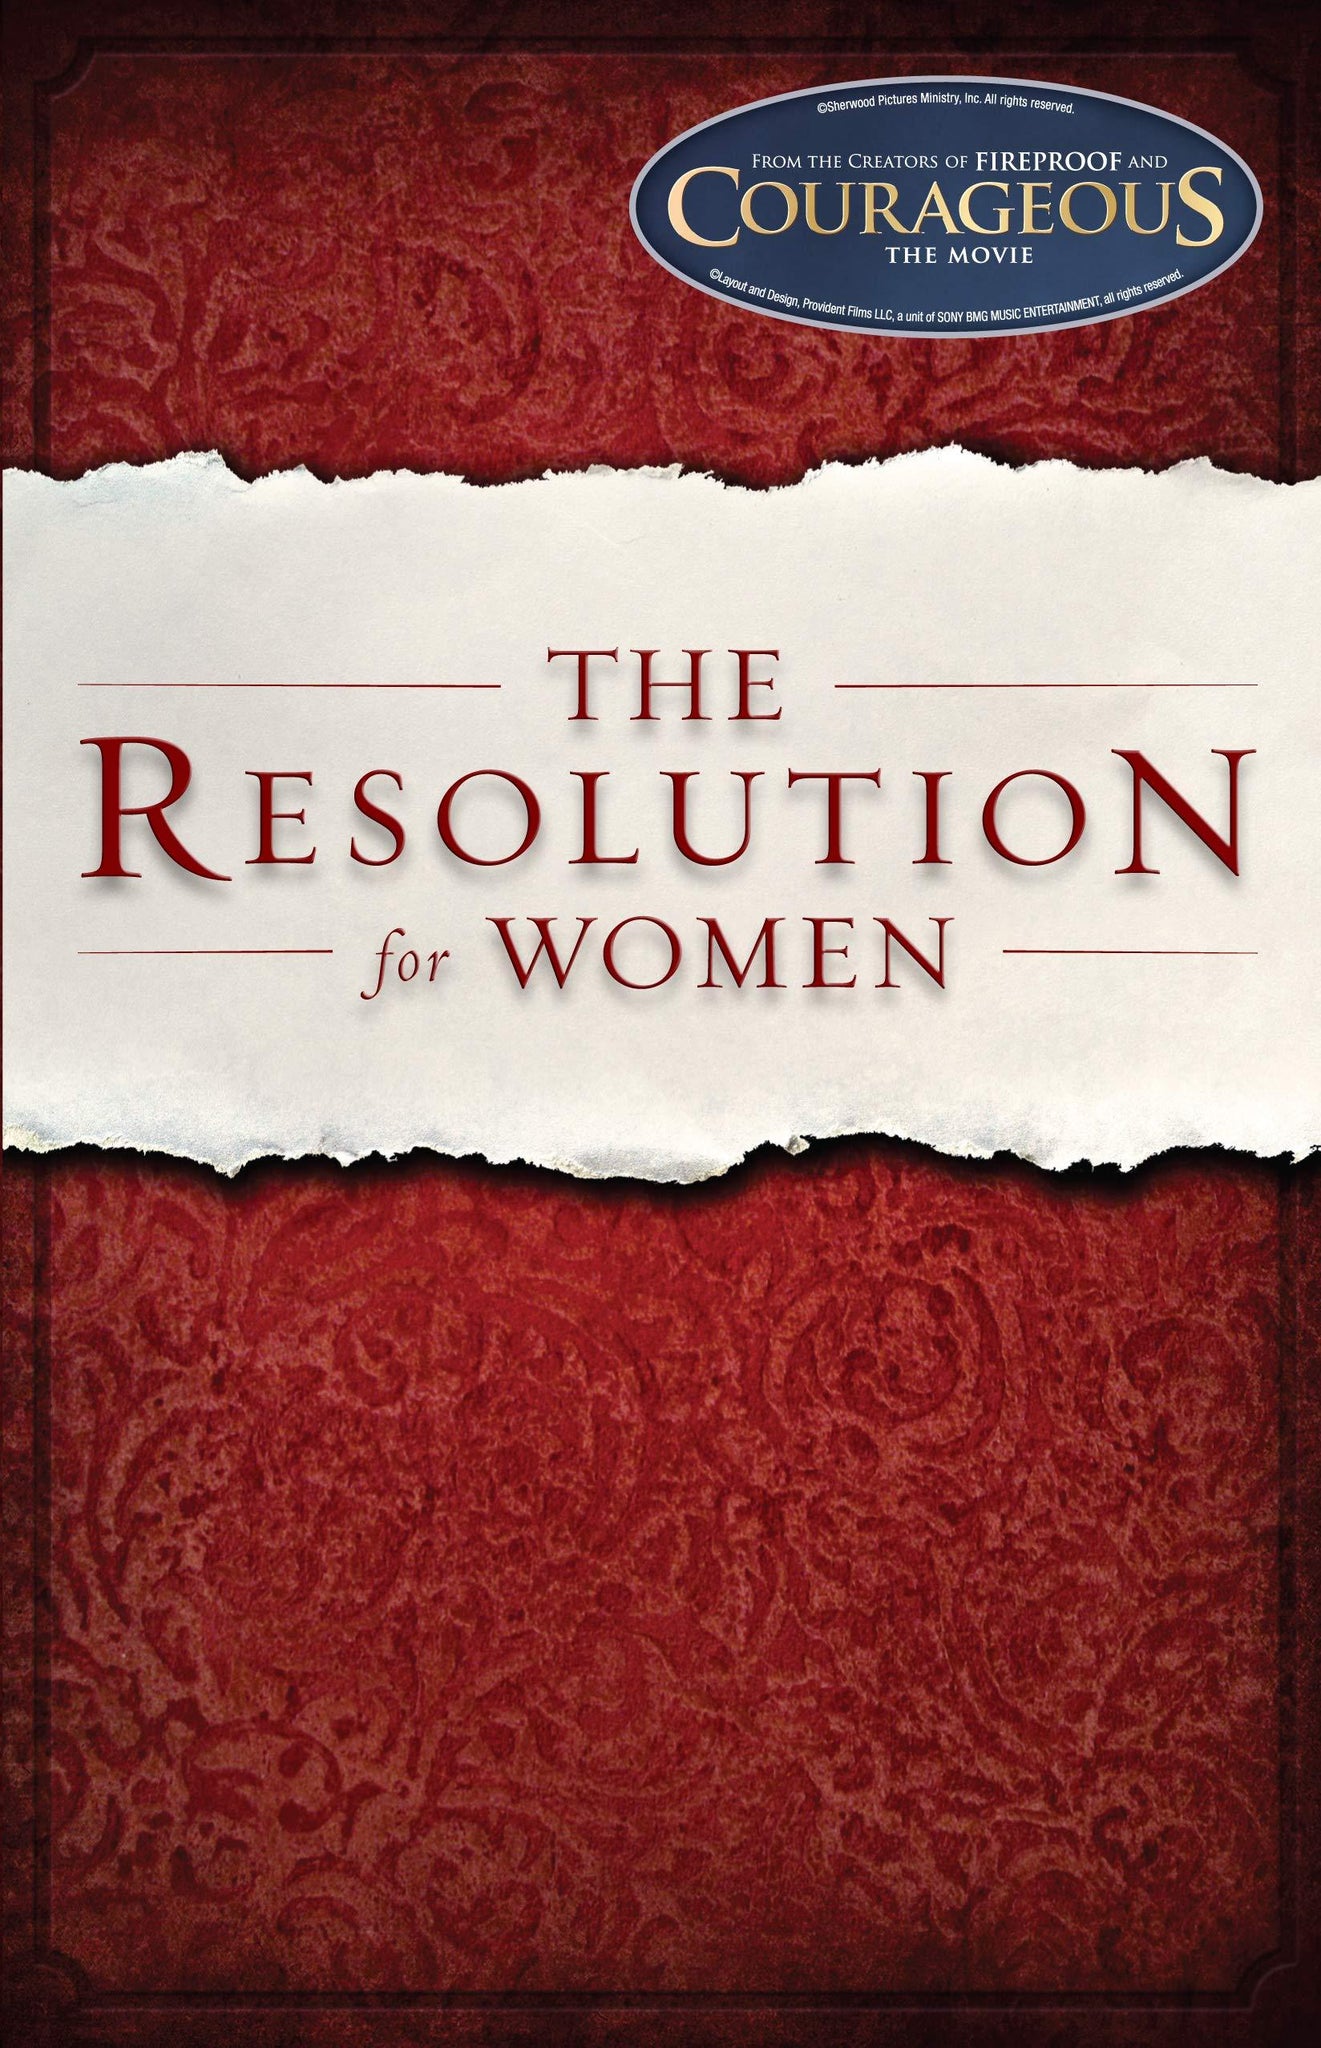 "The Resolution for Women" By Priscilla Shirer